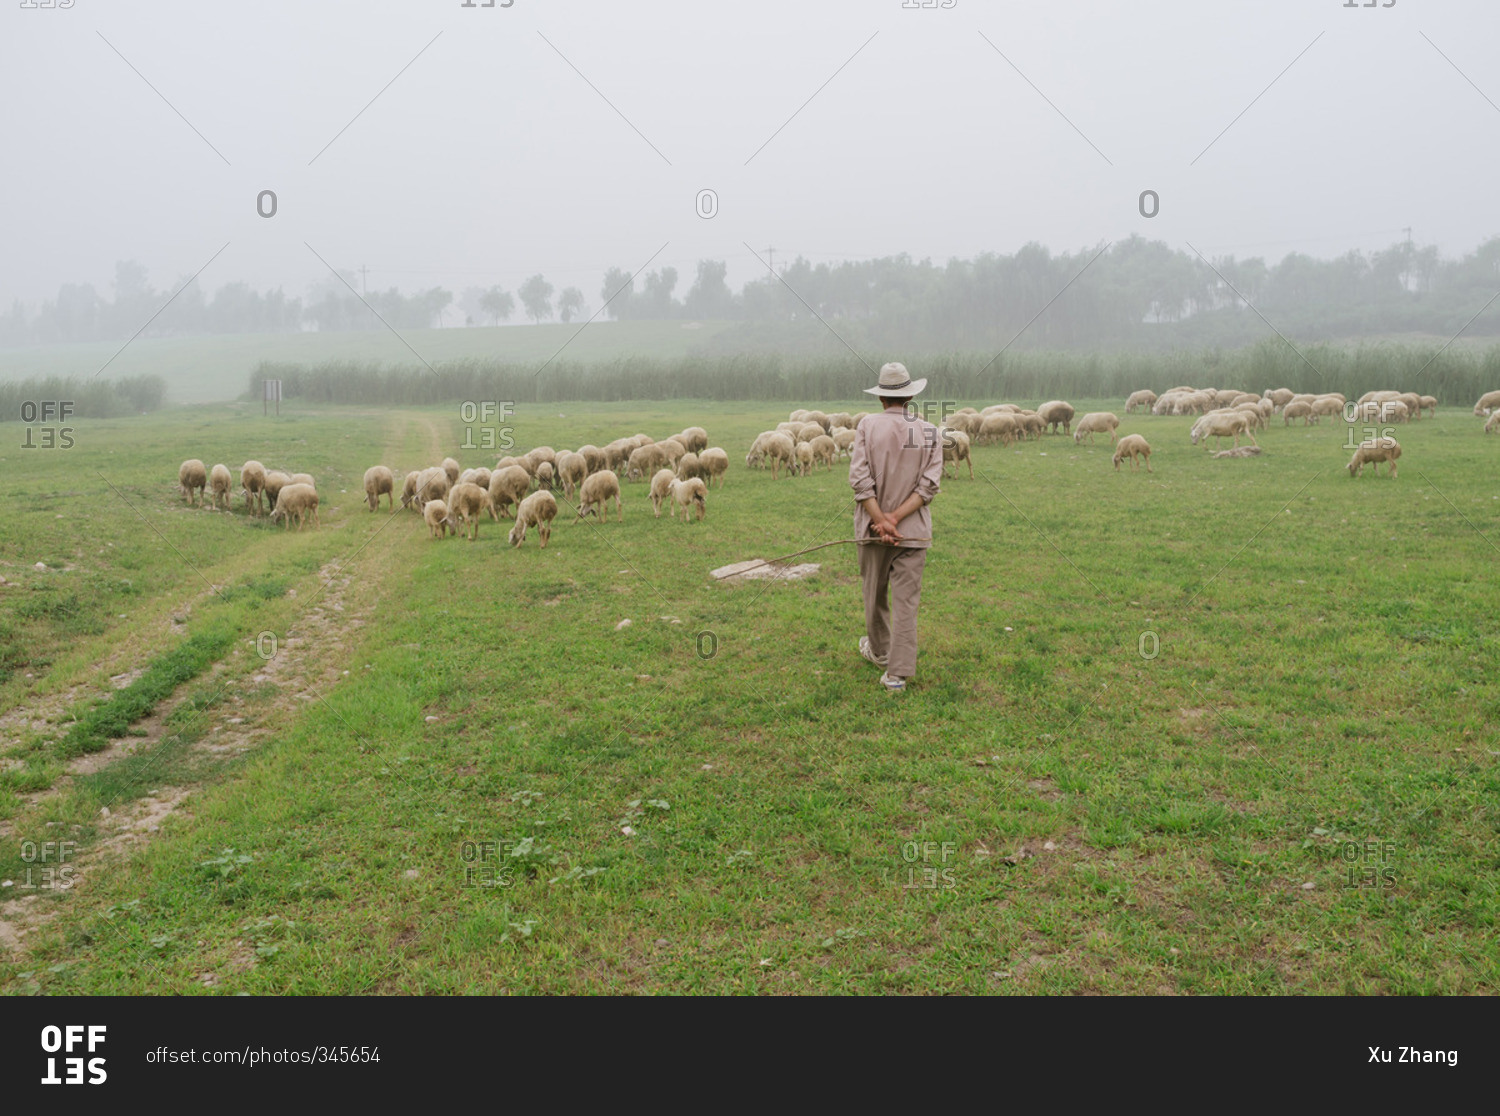 Herd of sheep on grassland with a farmer in a suburb of Beijing, China